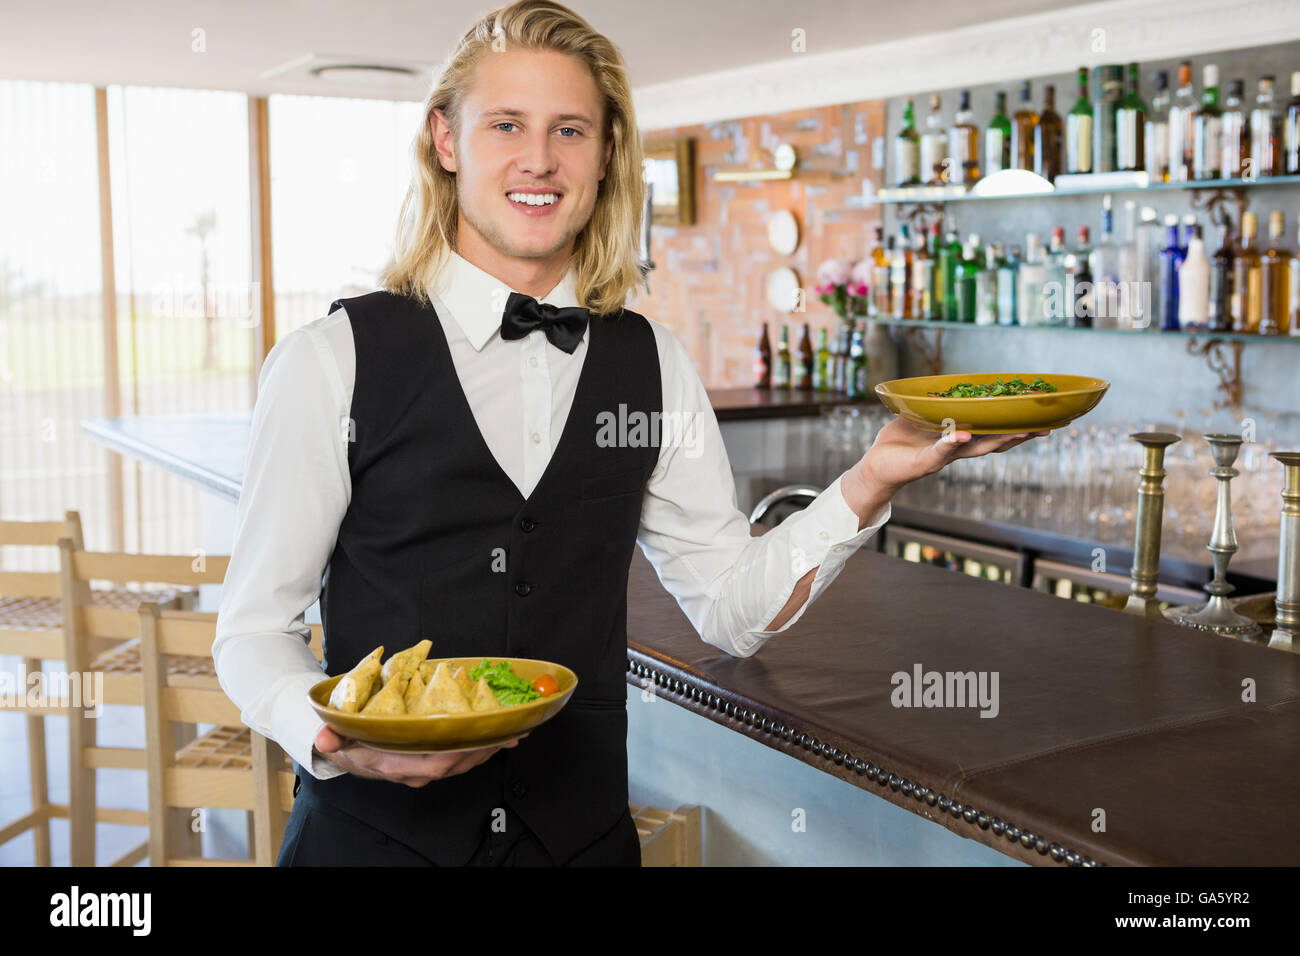 Waiter holding plated meals in restaurant Stock Photo